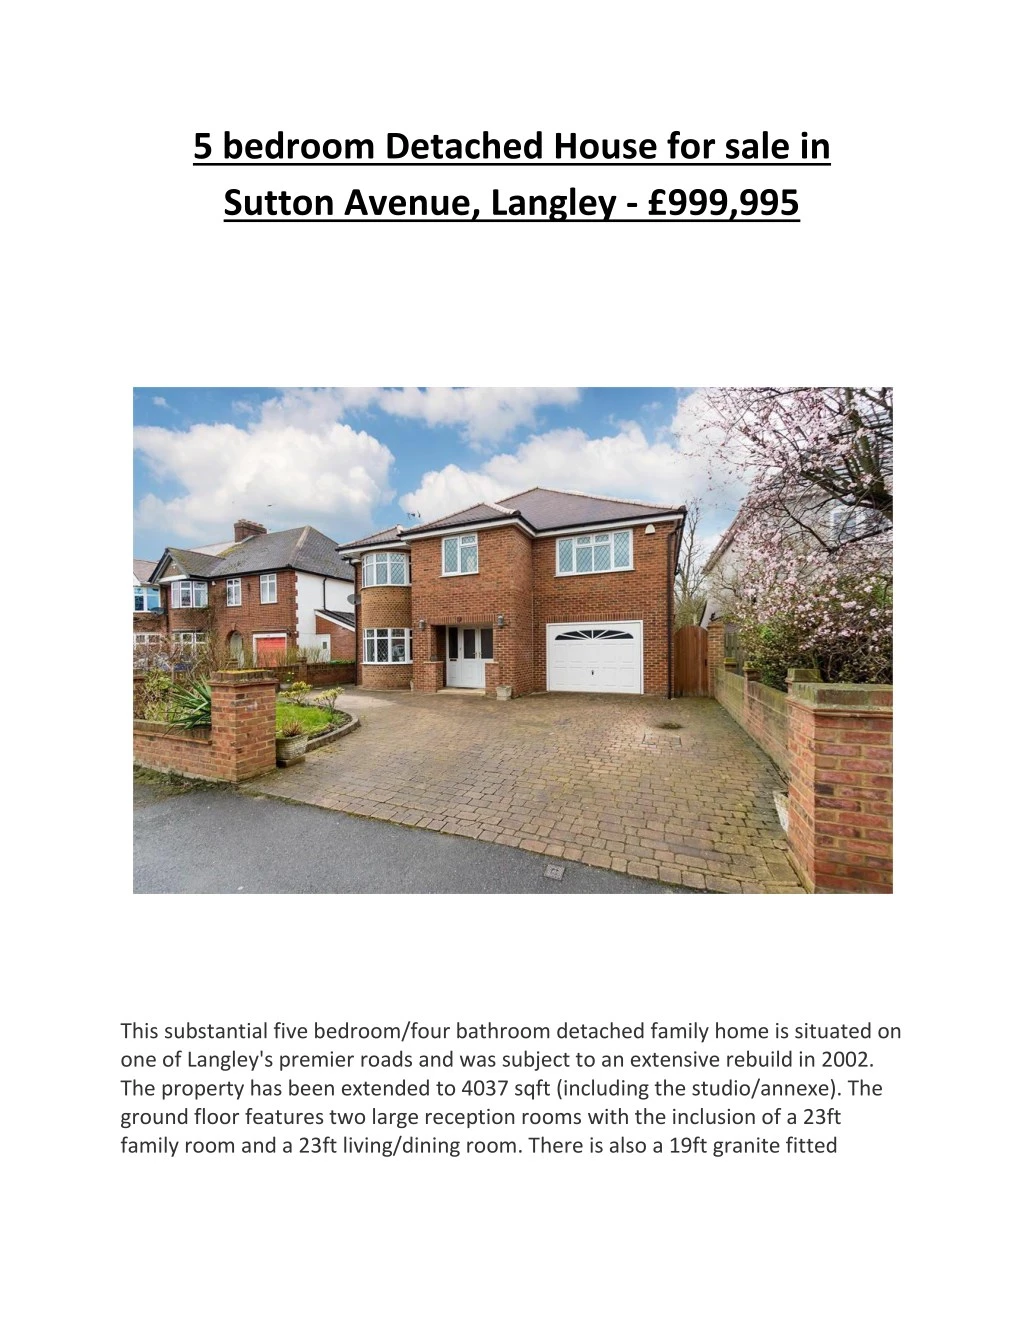 5 bedroom detached house for sale in sutton